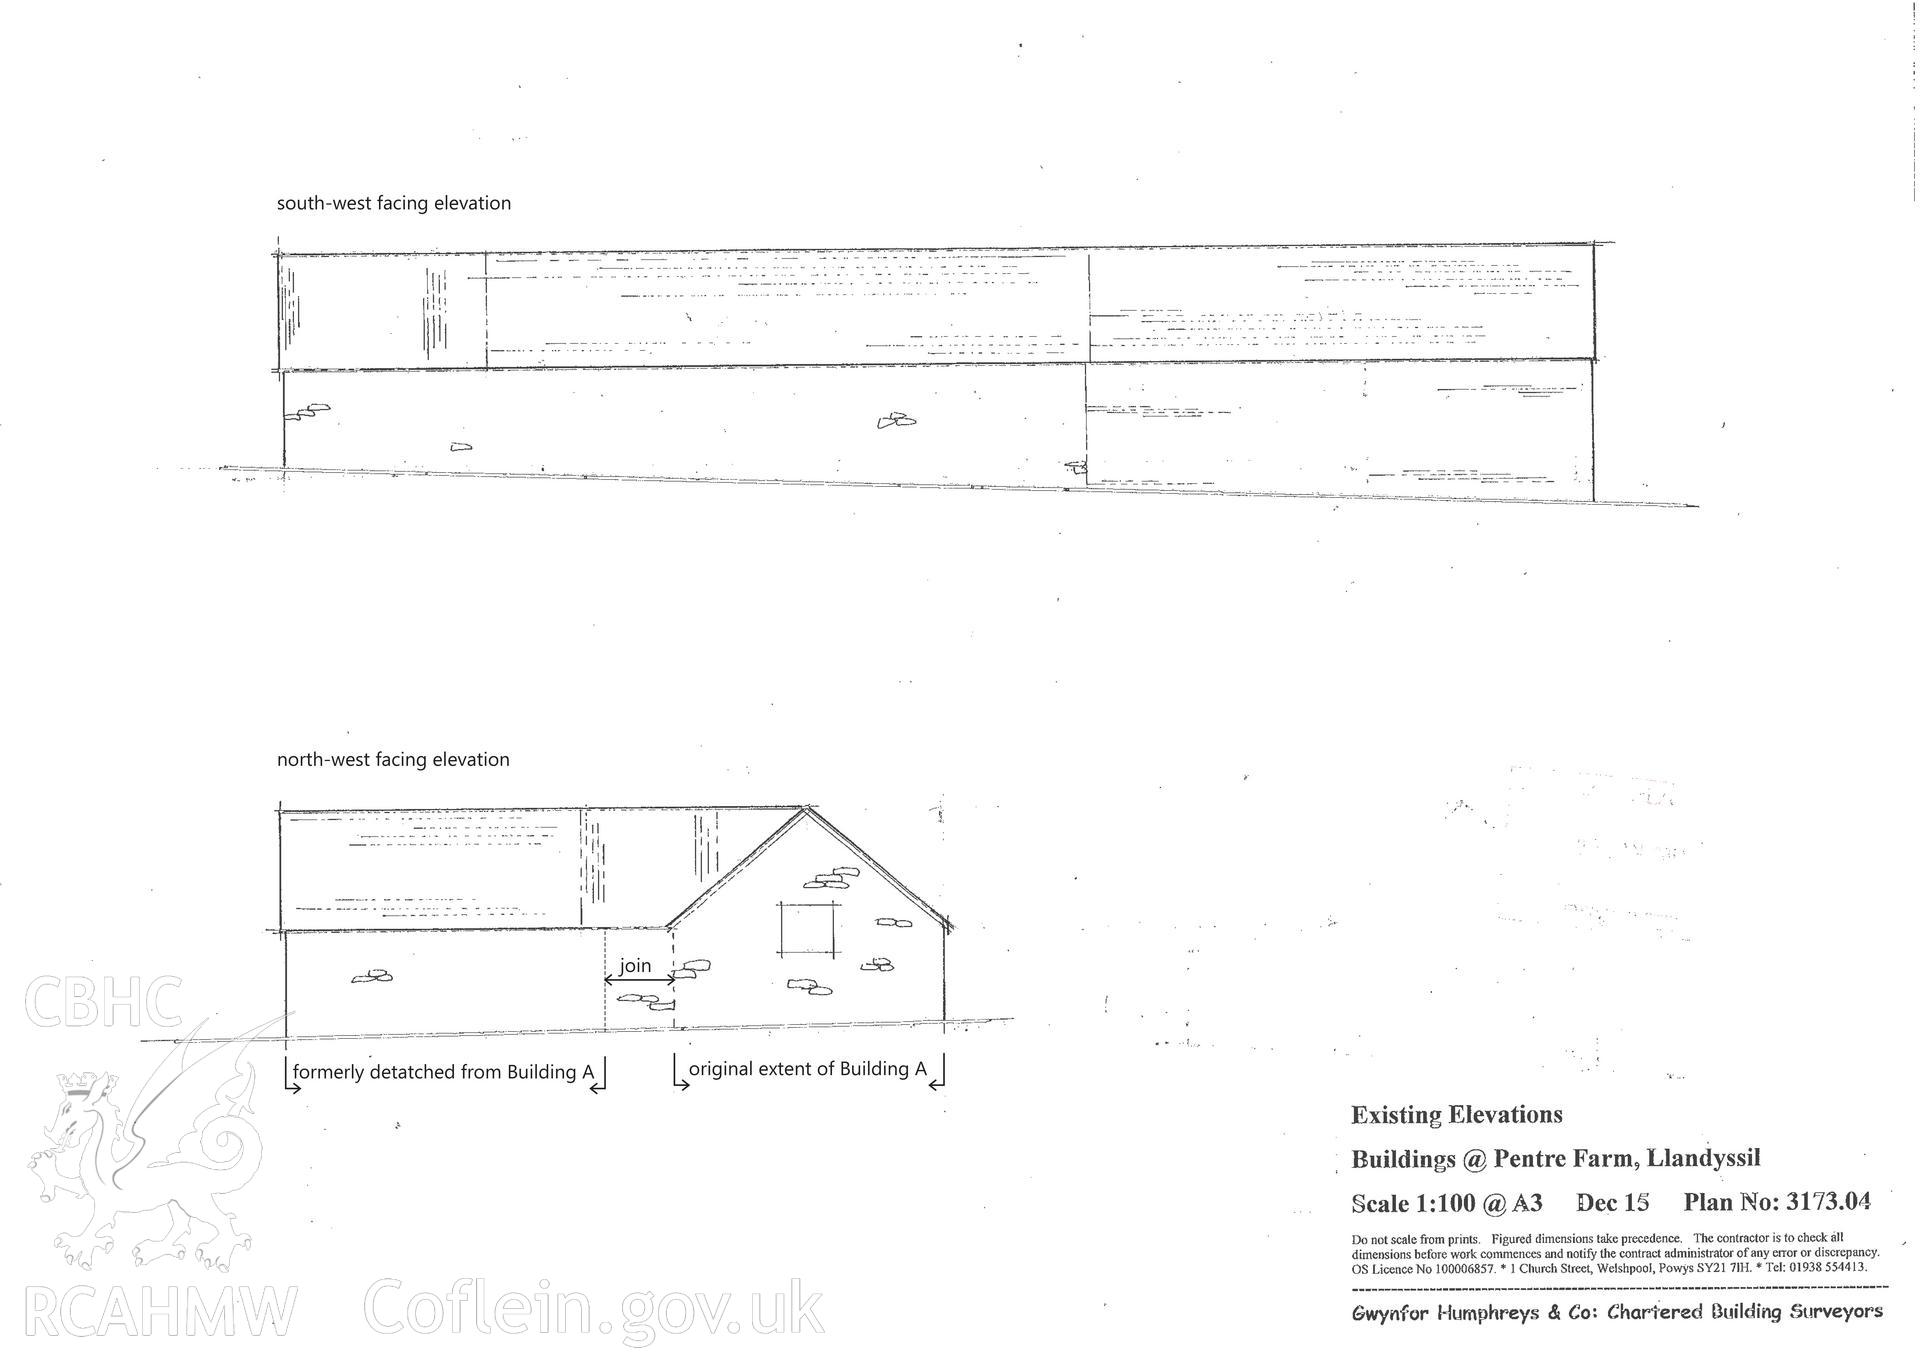 'Building A elevations' used as report illustration for CPAT Project 2414: Pentre Barns, Llandyssil, Powys - Building Survey. Prepared by Kate Pack of Clwyd Powys Archaeological Trust, 2019. Report no. 1694.